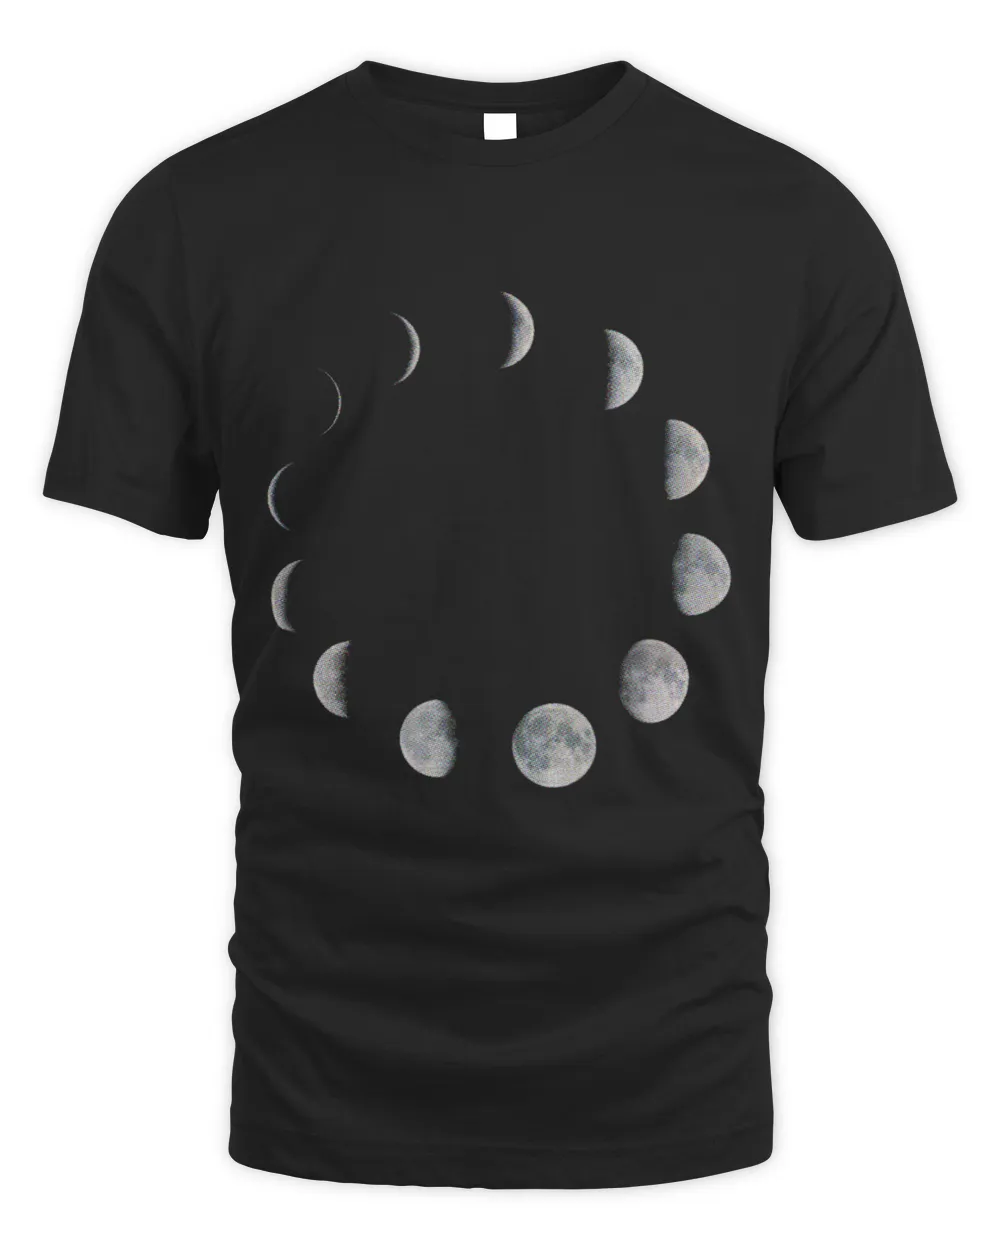 Luna Moon Phases Mens Womens sizes